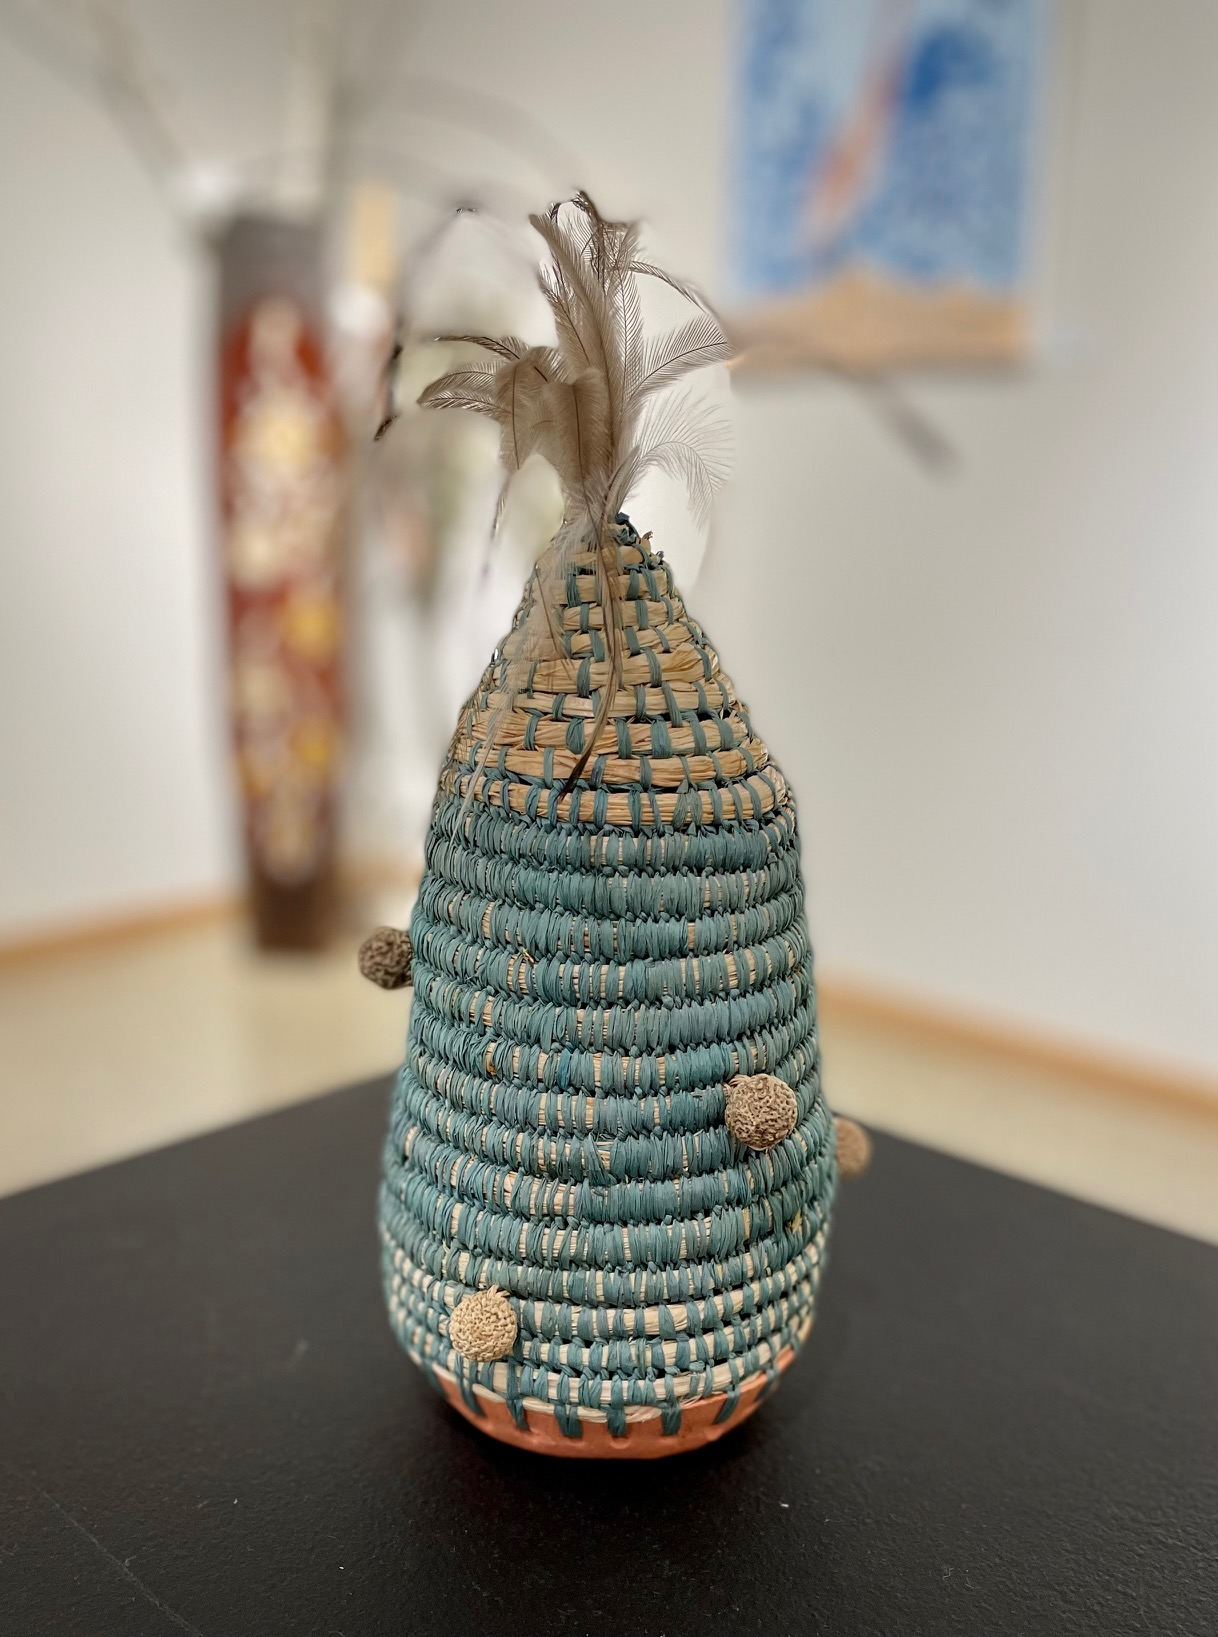 Woven Vase with Emu Feathers and Quandong - Trish Cerminara (Gamilaroi)